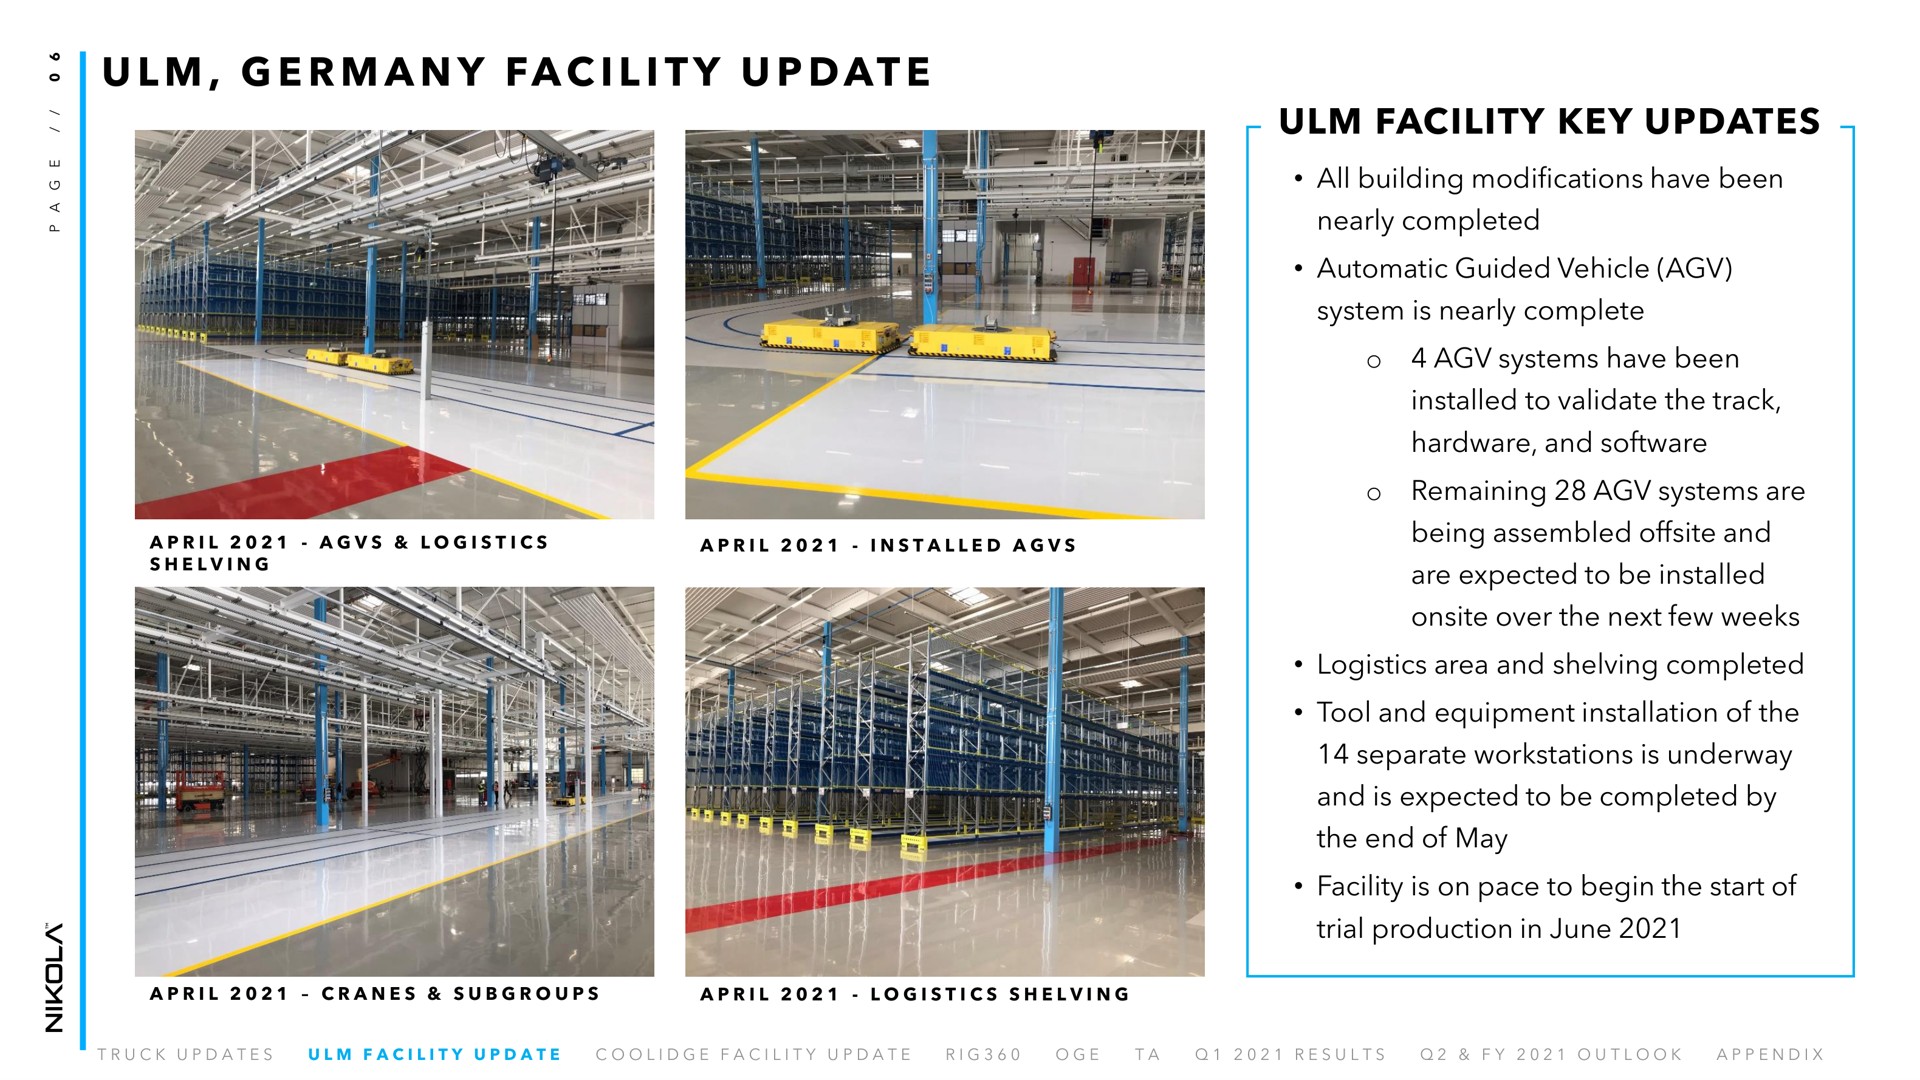 a i i at facility key updates update all building modifications have been tool and equipment installation of the separate is underway the end of may | Nikola